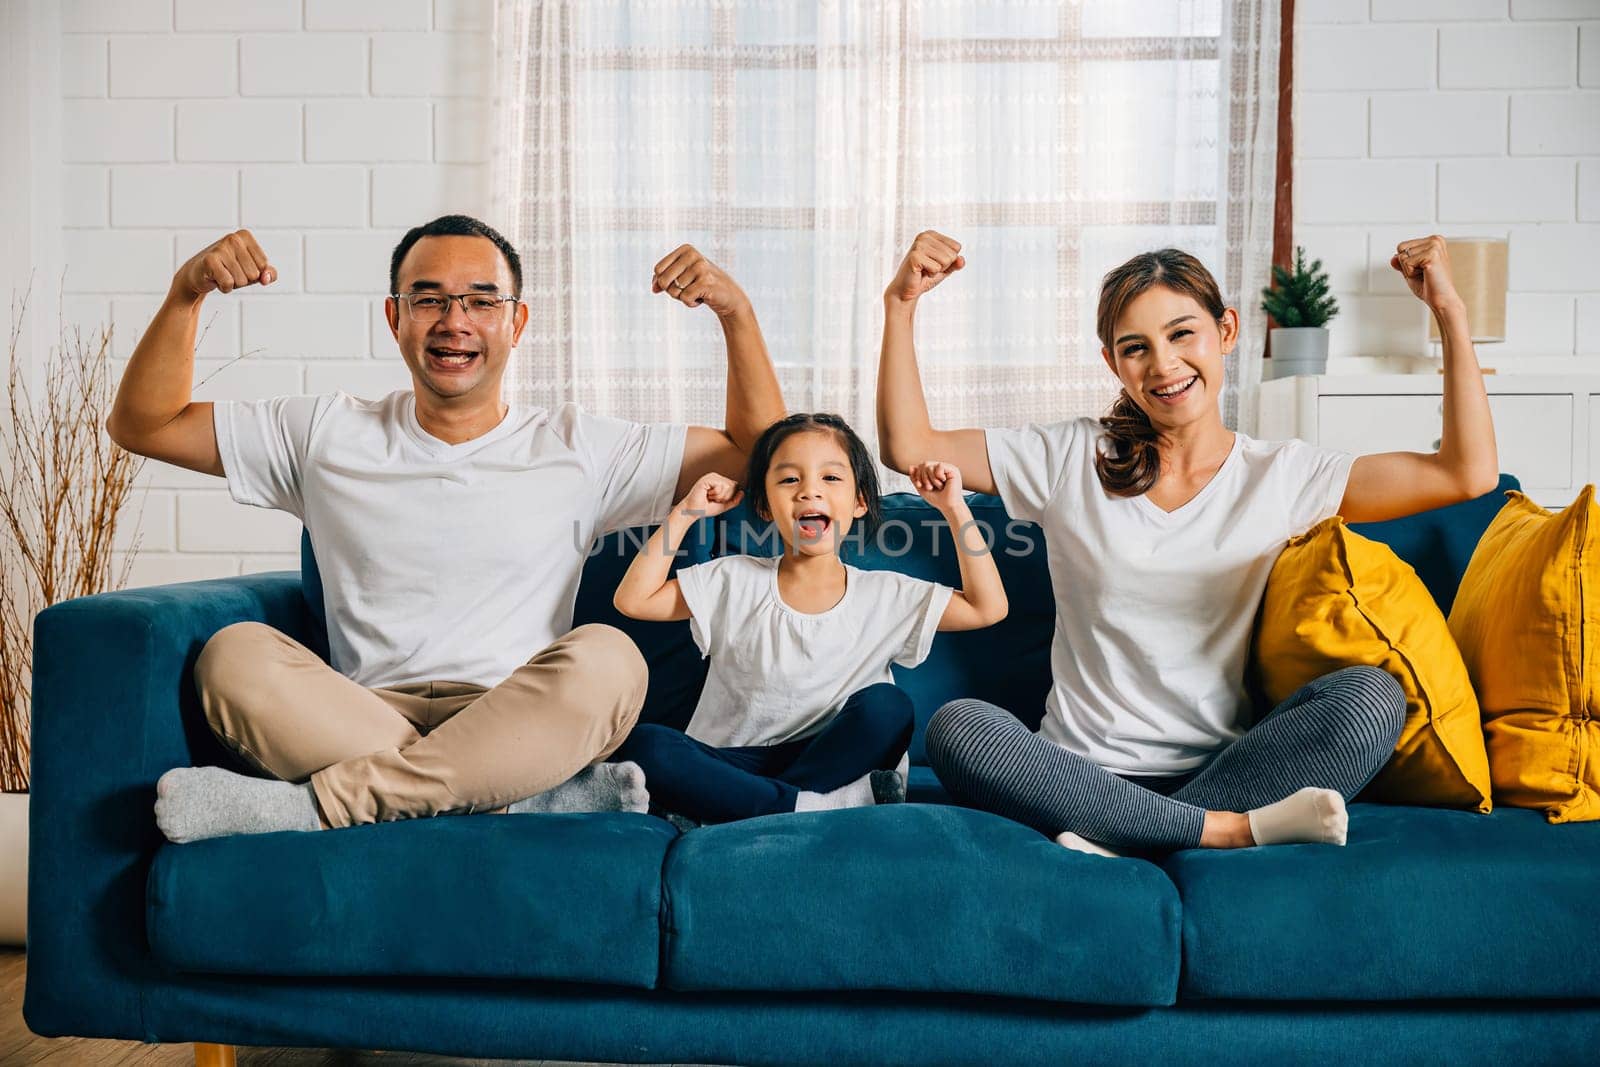 In their cozy living room a family day concept unfolds as young parents their child and daughter highlight their biceps muscles showcasing strength and togetherness with smiles and joy.